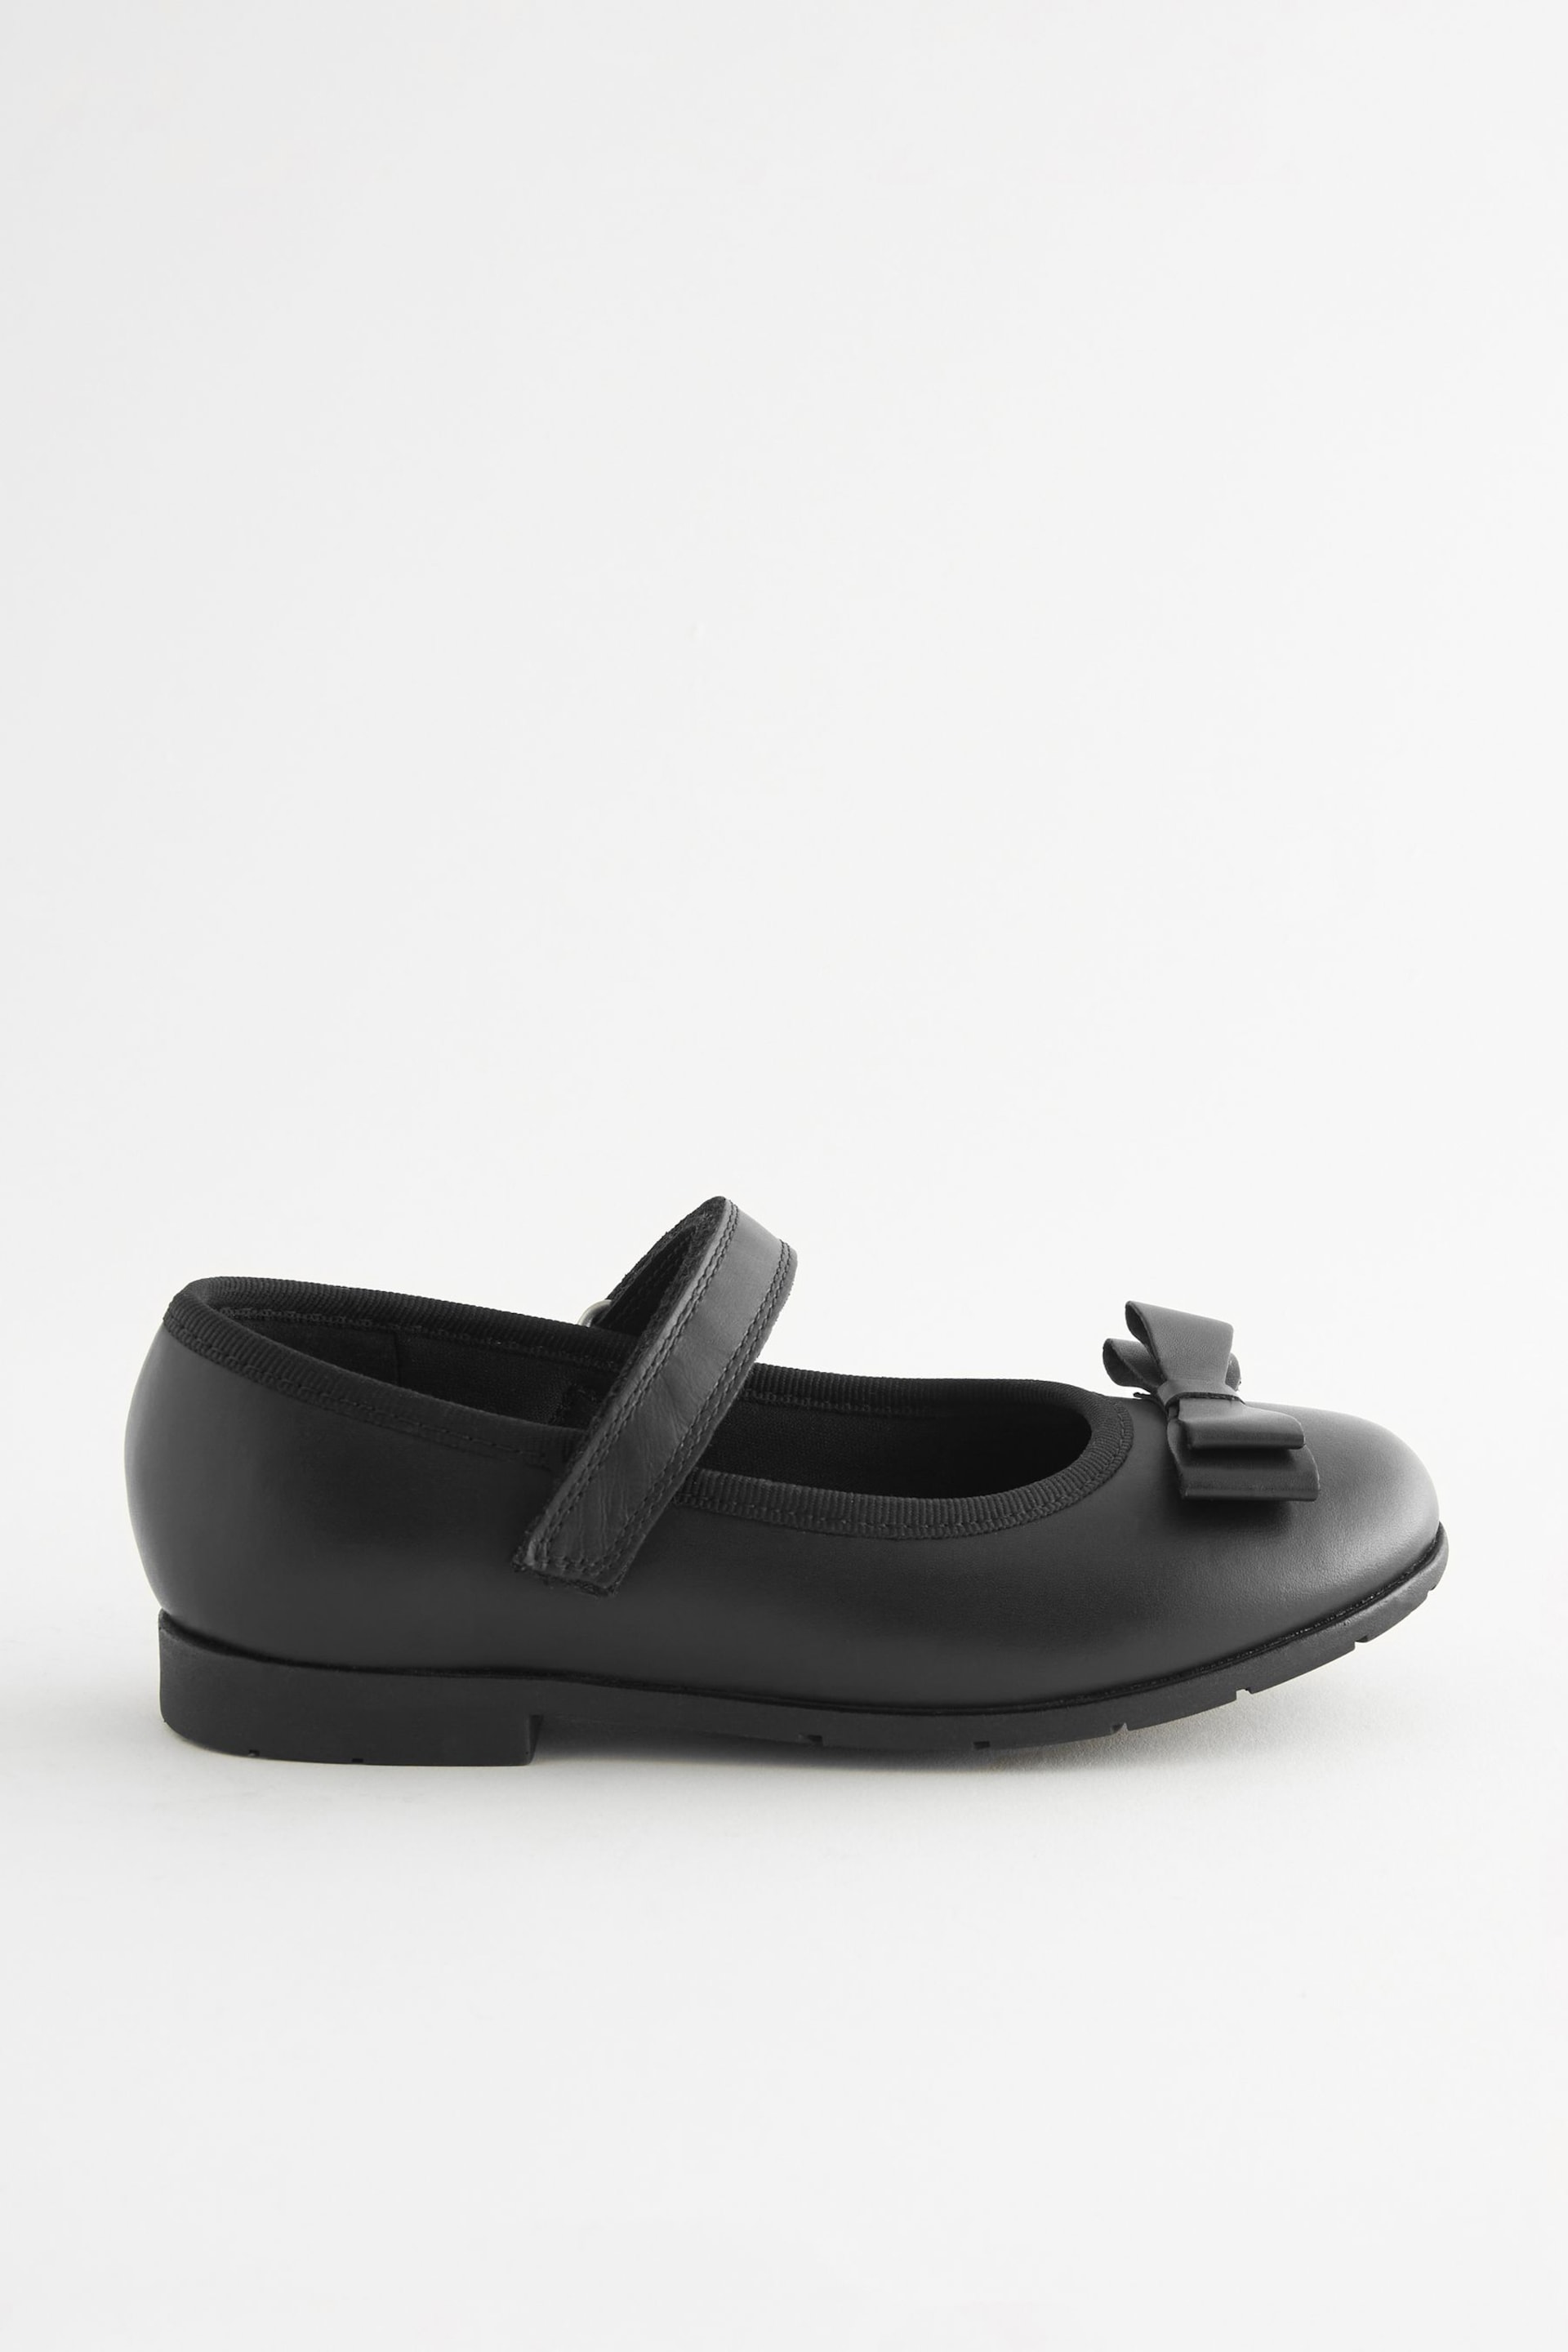 Black Wide Fit (G) School Leather Bow Mary Jane Shoes - Image 4 of 6